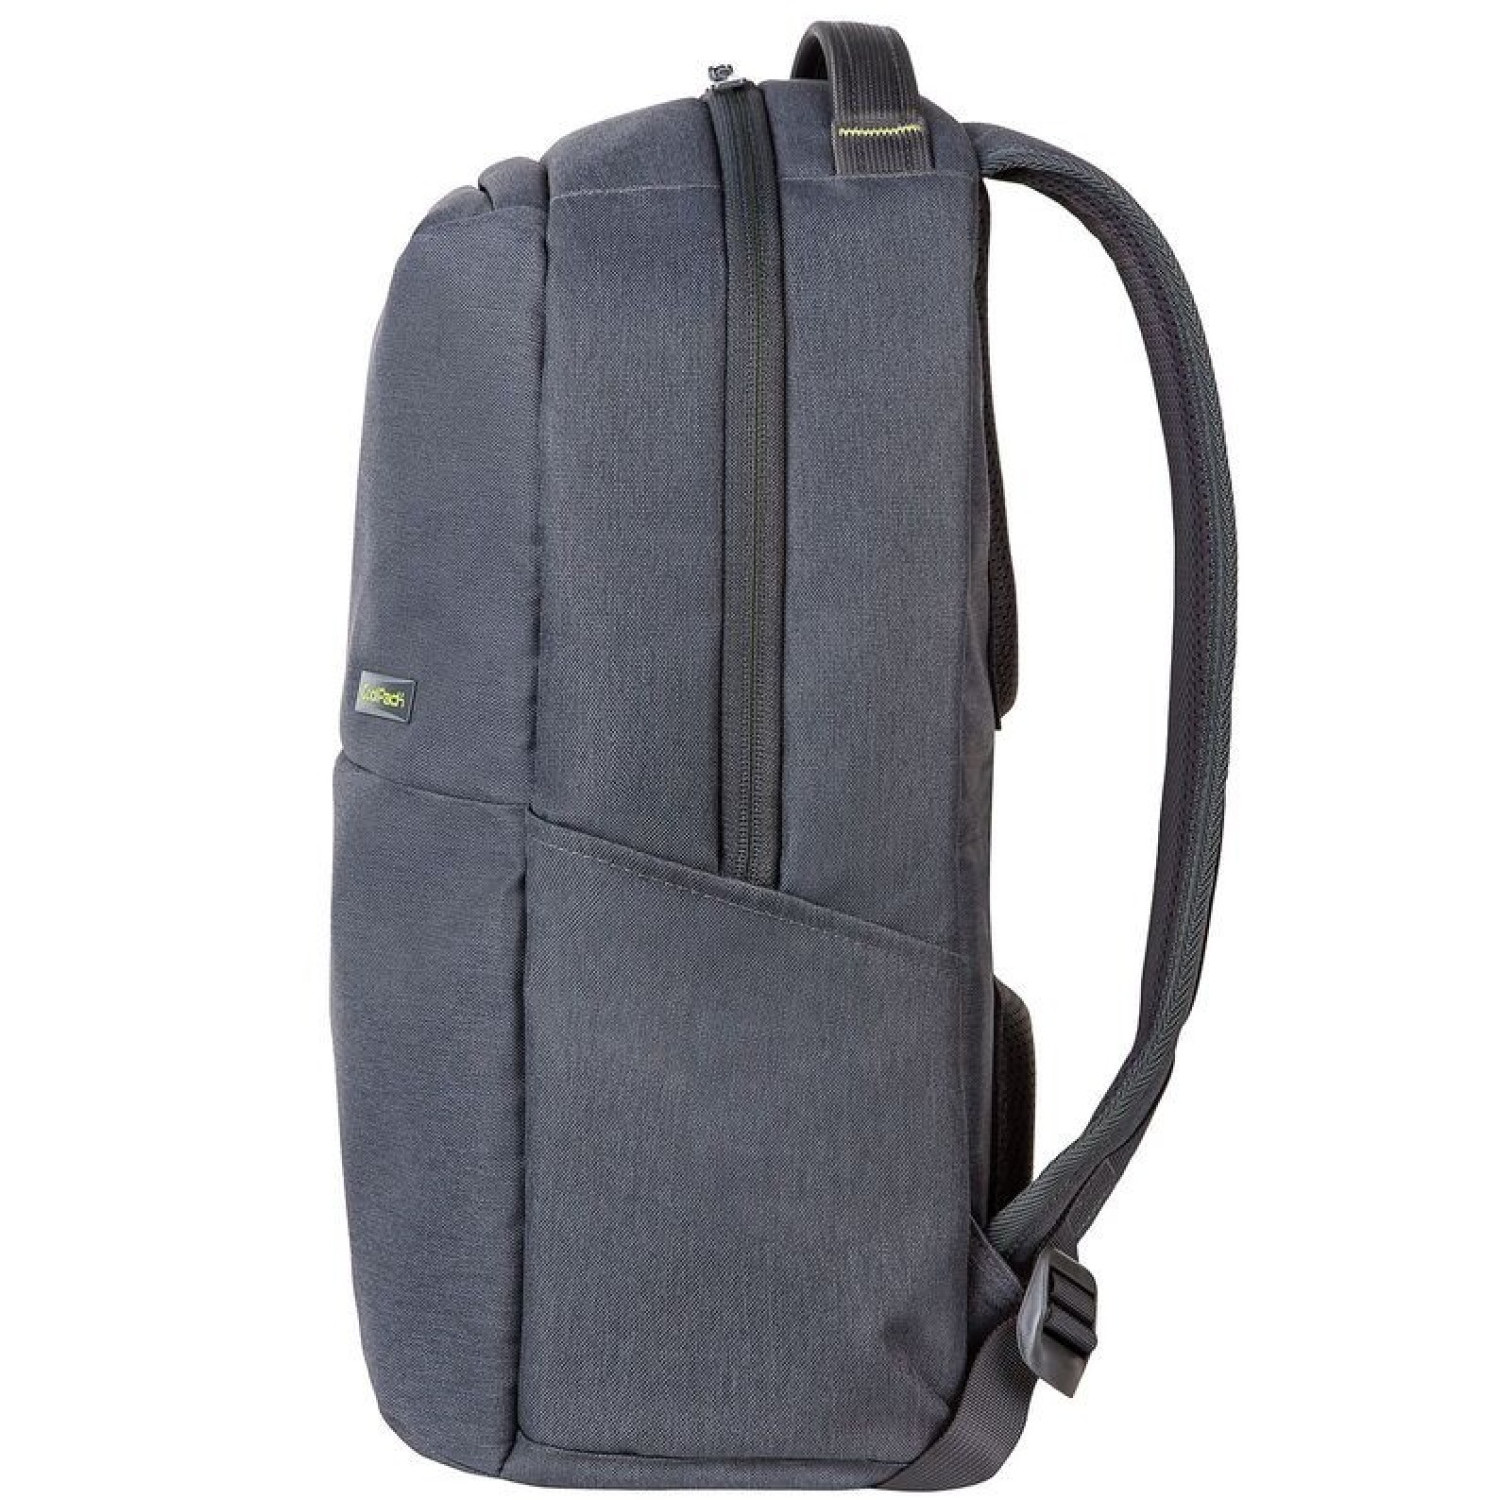 Раница Coolpack Ray Grey, E53009